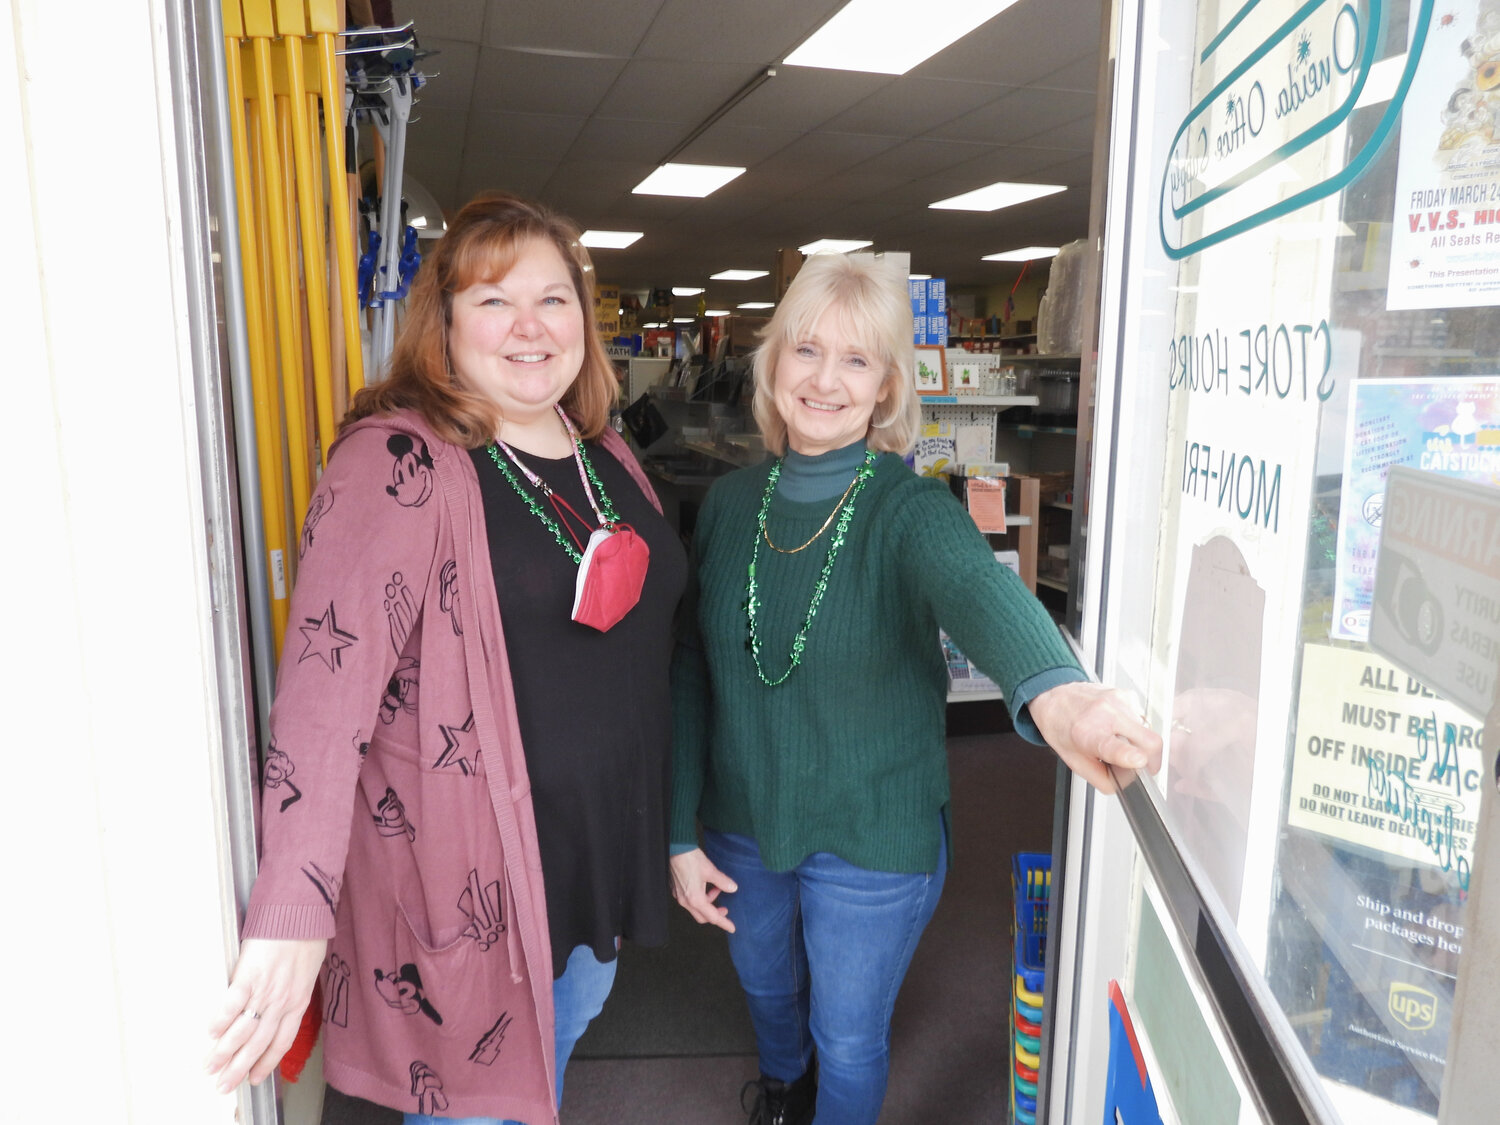 Oneida Office Supply Owner Nancy Kinney and Manager Stacy Jones are happy to help anyone who comes through their door, whether they’re looking for a gift, a new business card or school or office supplies.